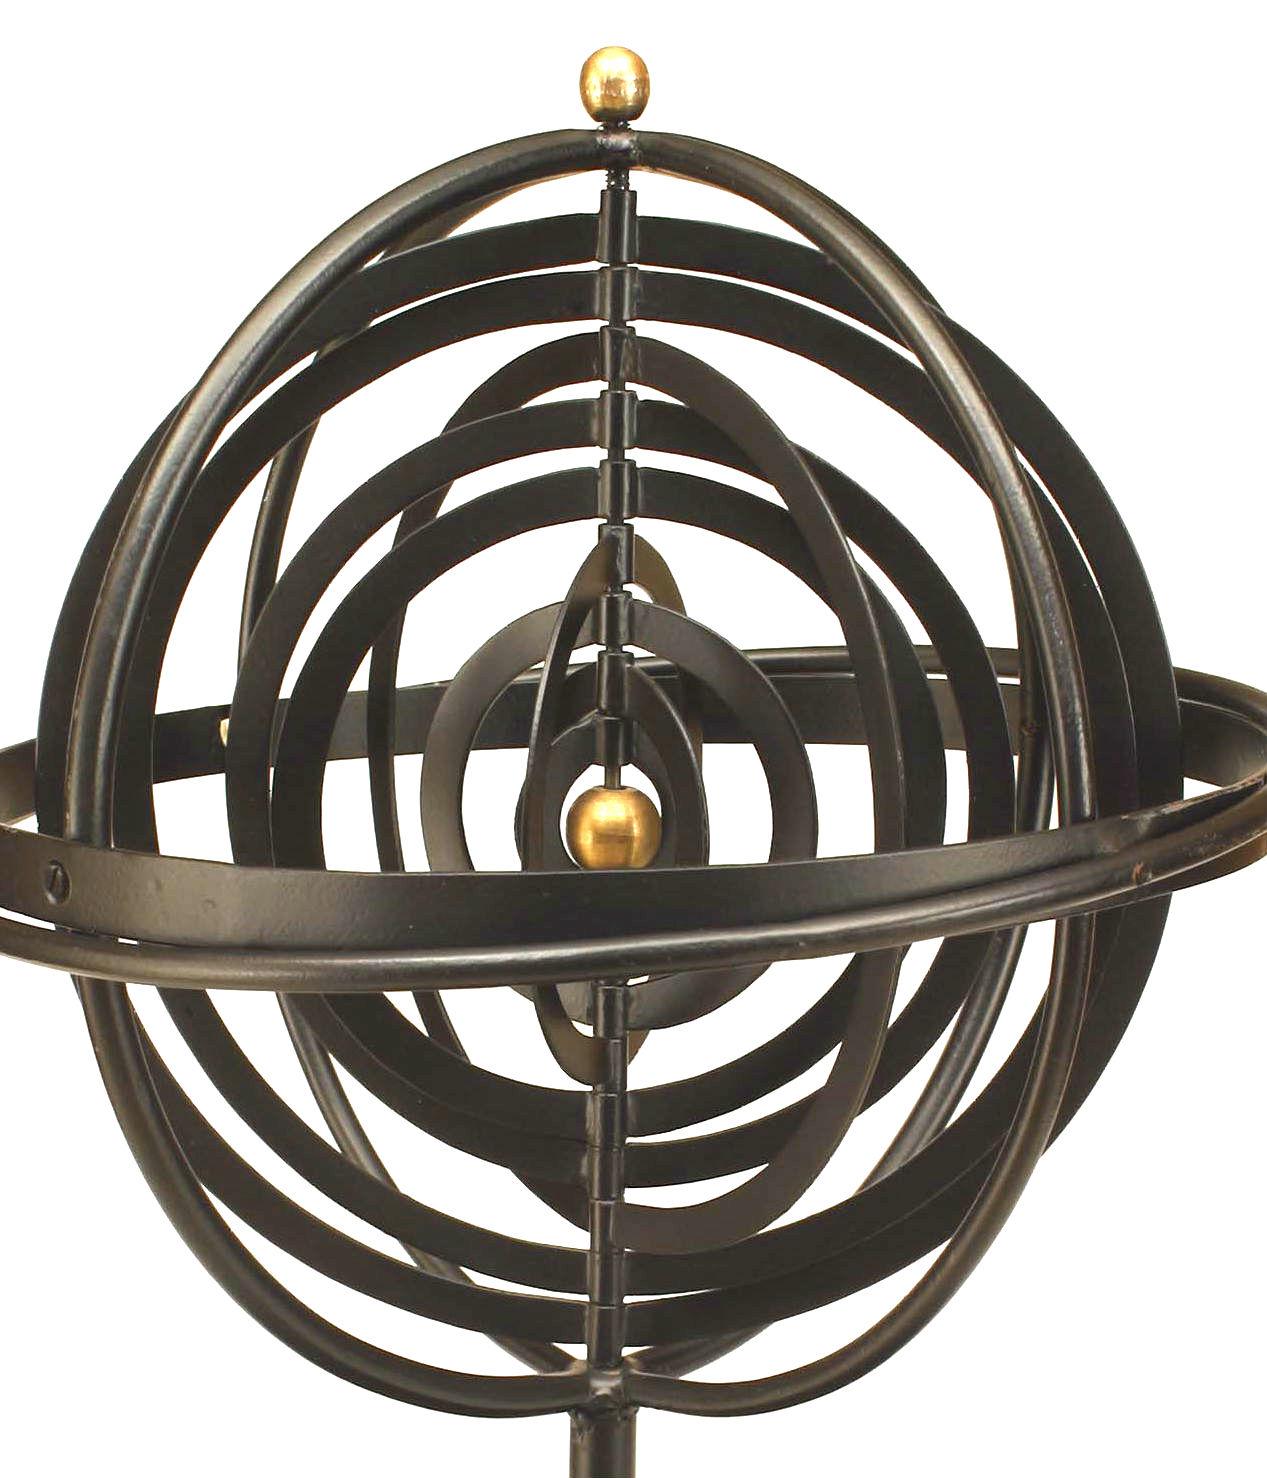 Twentieth century Renaissance style iron armillary sphere inspired by the the Copernican Model with concentric orbits, a tiered stem, and ringed circular base accented by a gold painted sun and finial.